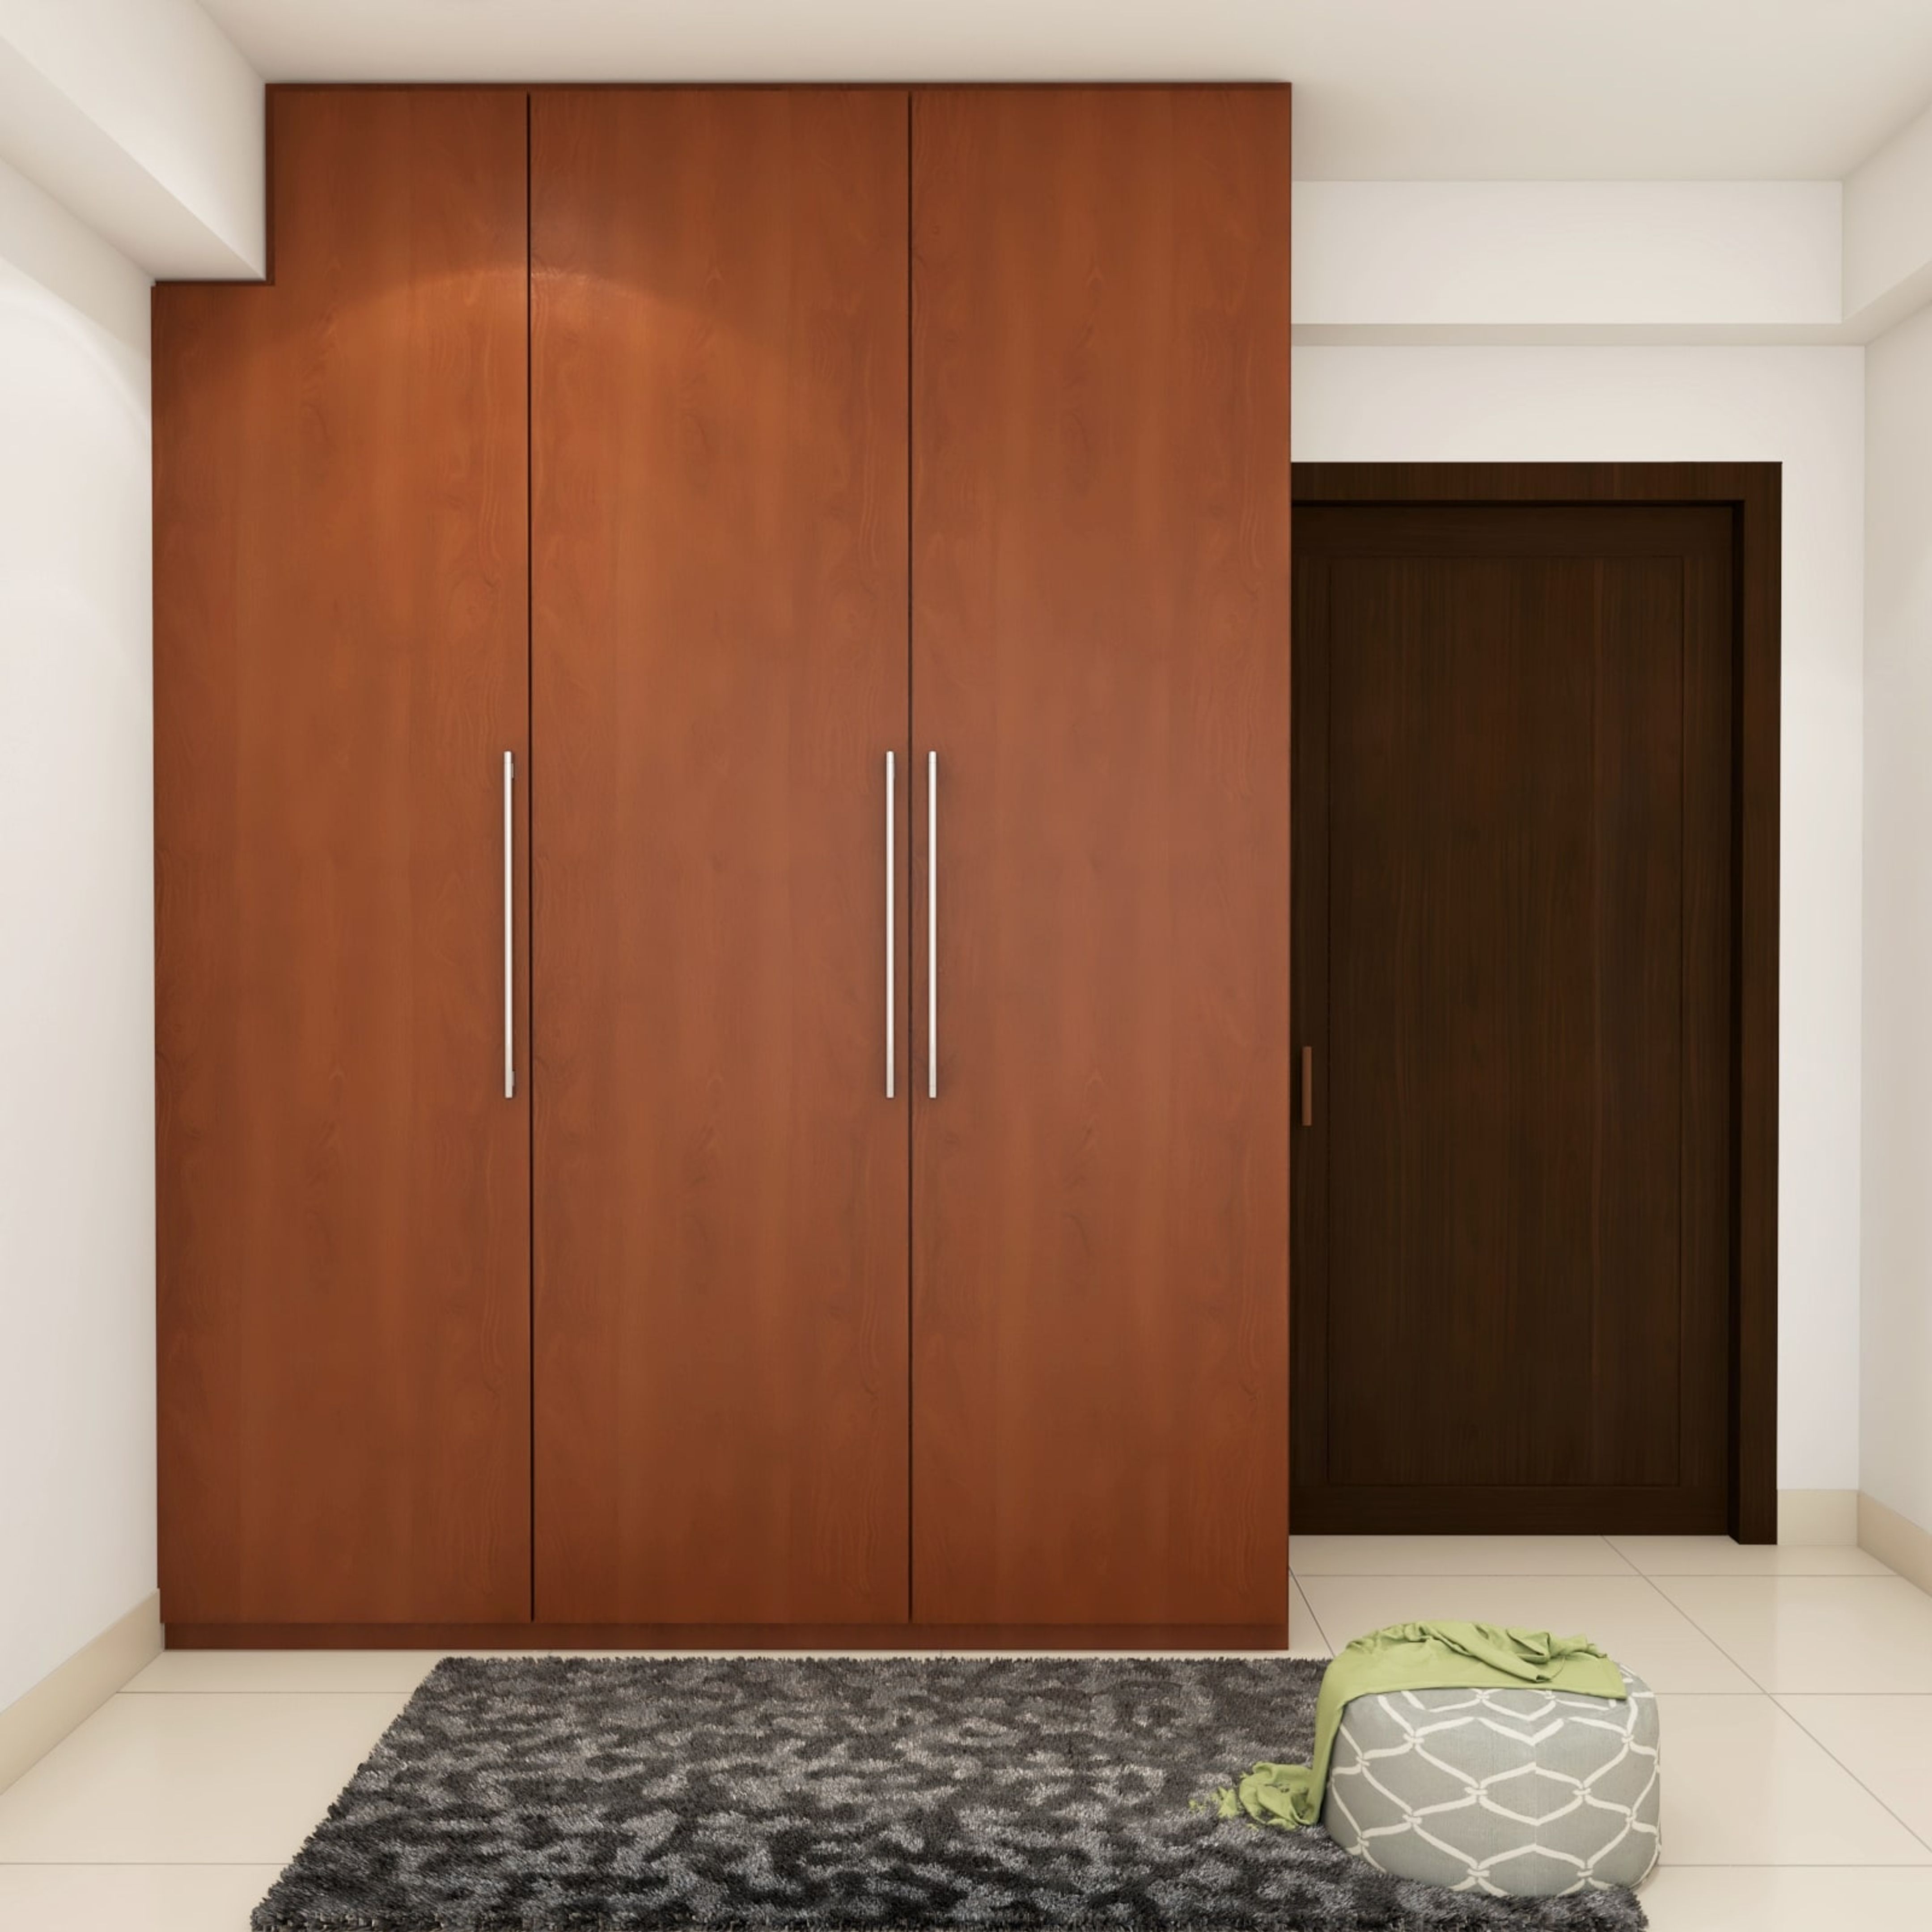 Compact Wooden Wardrobe Design With Suede Finish | Livspace